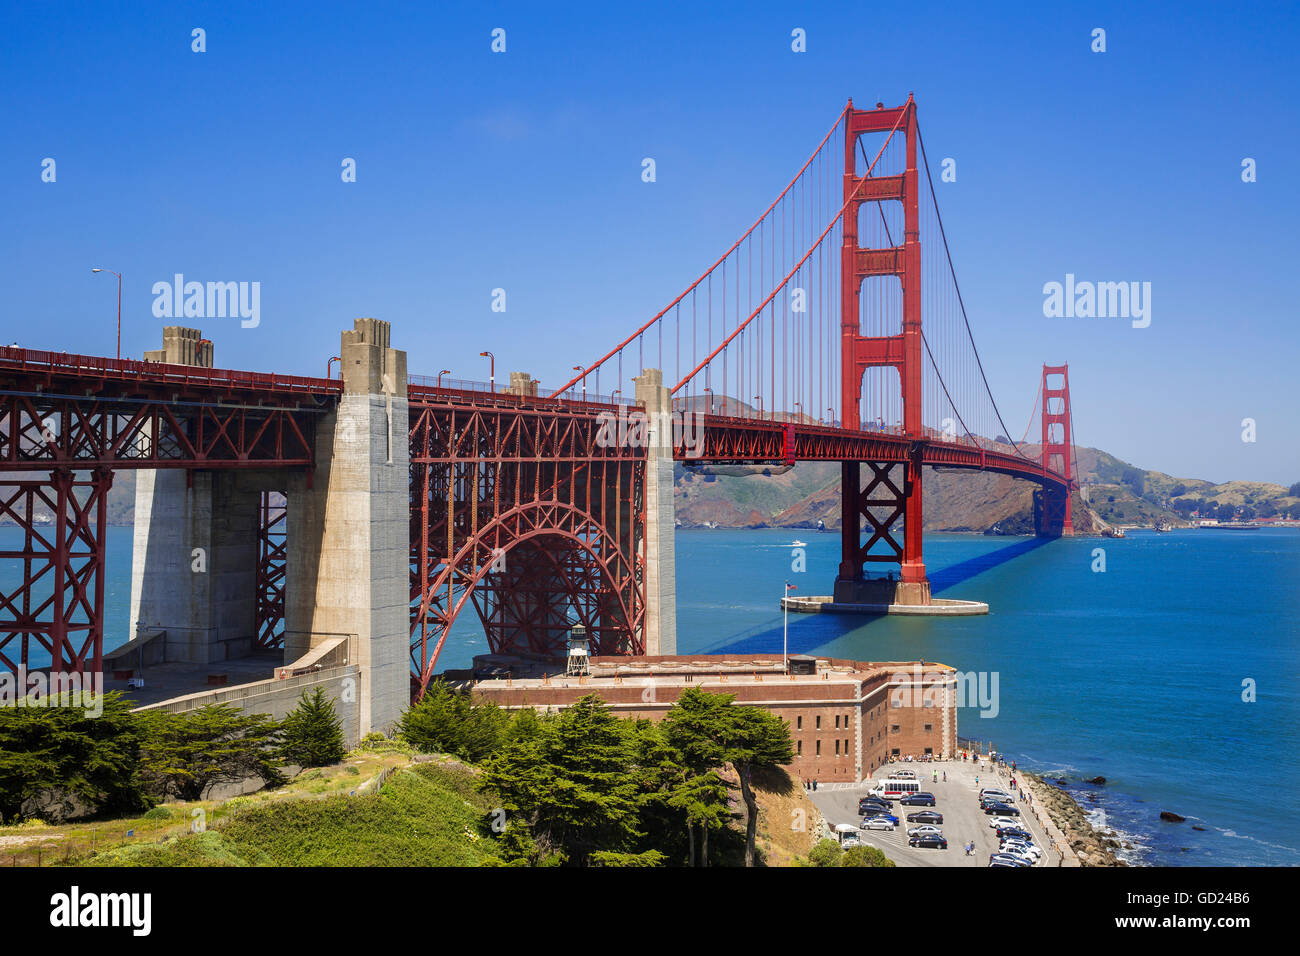 San Francisco Golden Gate Bridge with Fort George in the foreground at the edge of the Pacific Ocean, California, USA Stock Photo